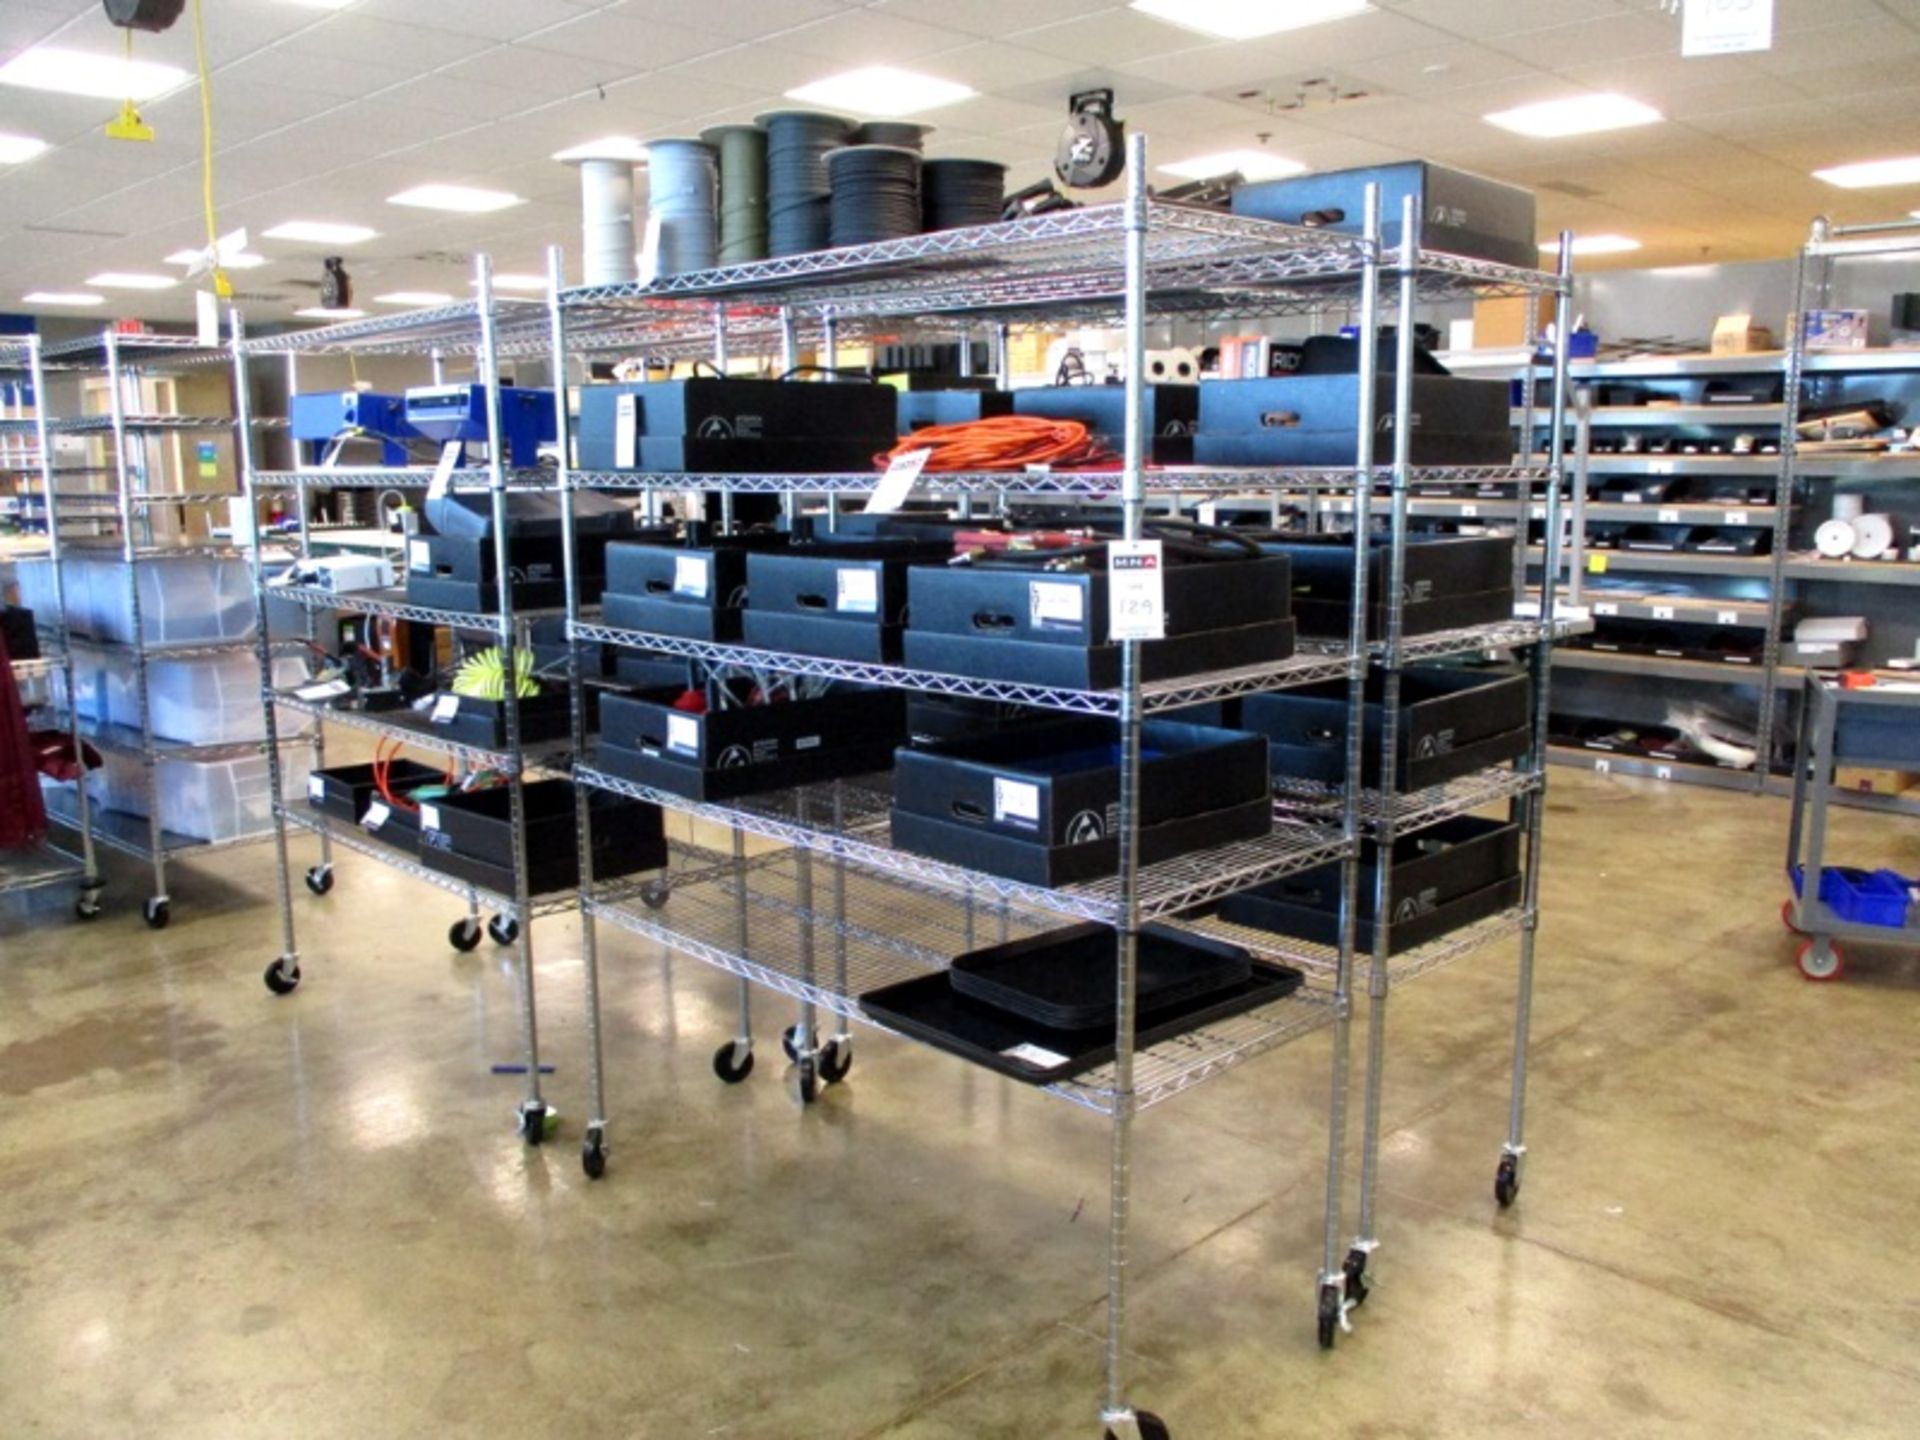 (4) Rolling wire racks, 6' tall (Items on racks not included)